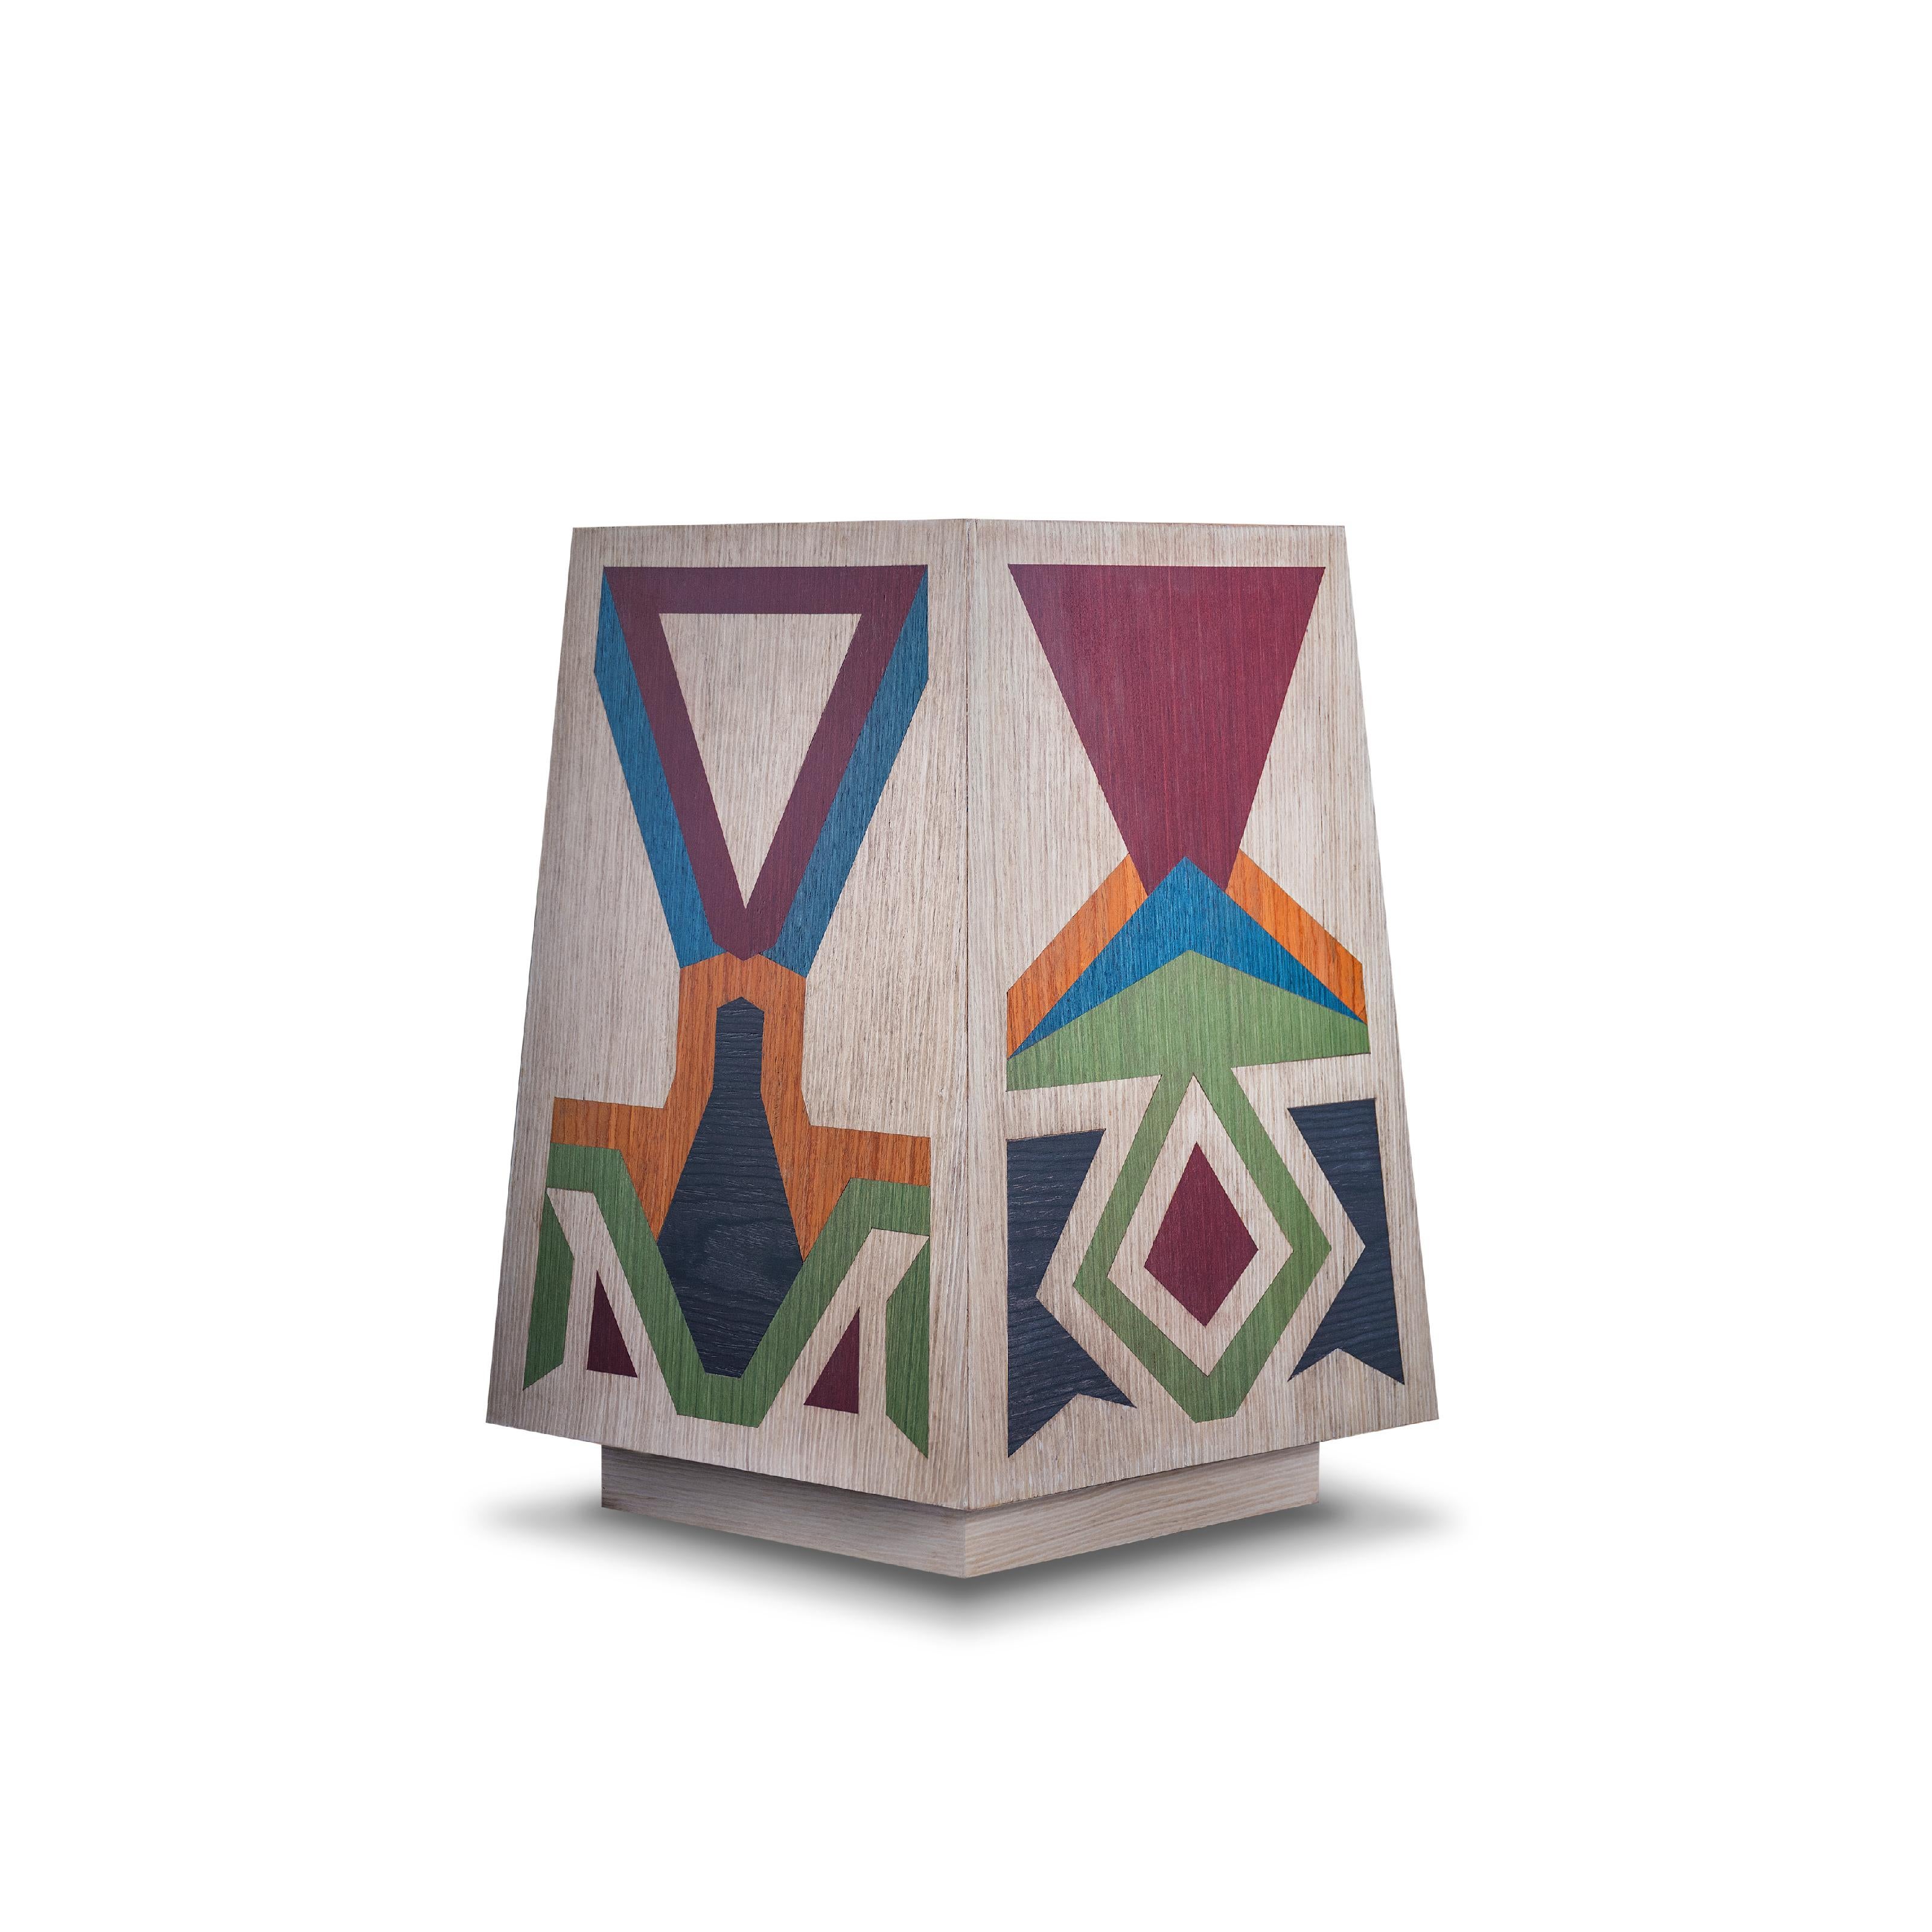 The hexagonal stool draws inspiration from Karim Ataya's intricate Islamic patterns, embodying geometric elegance and spiritual symbolism. Meticulously crafted patterns adorn each side, creating a harmonious balance and reﬂecting the principles of